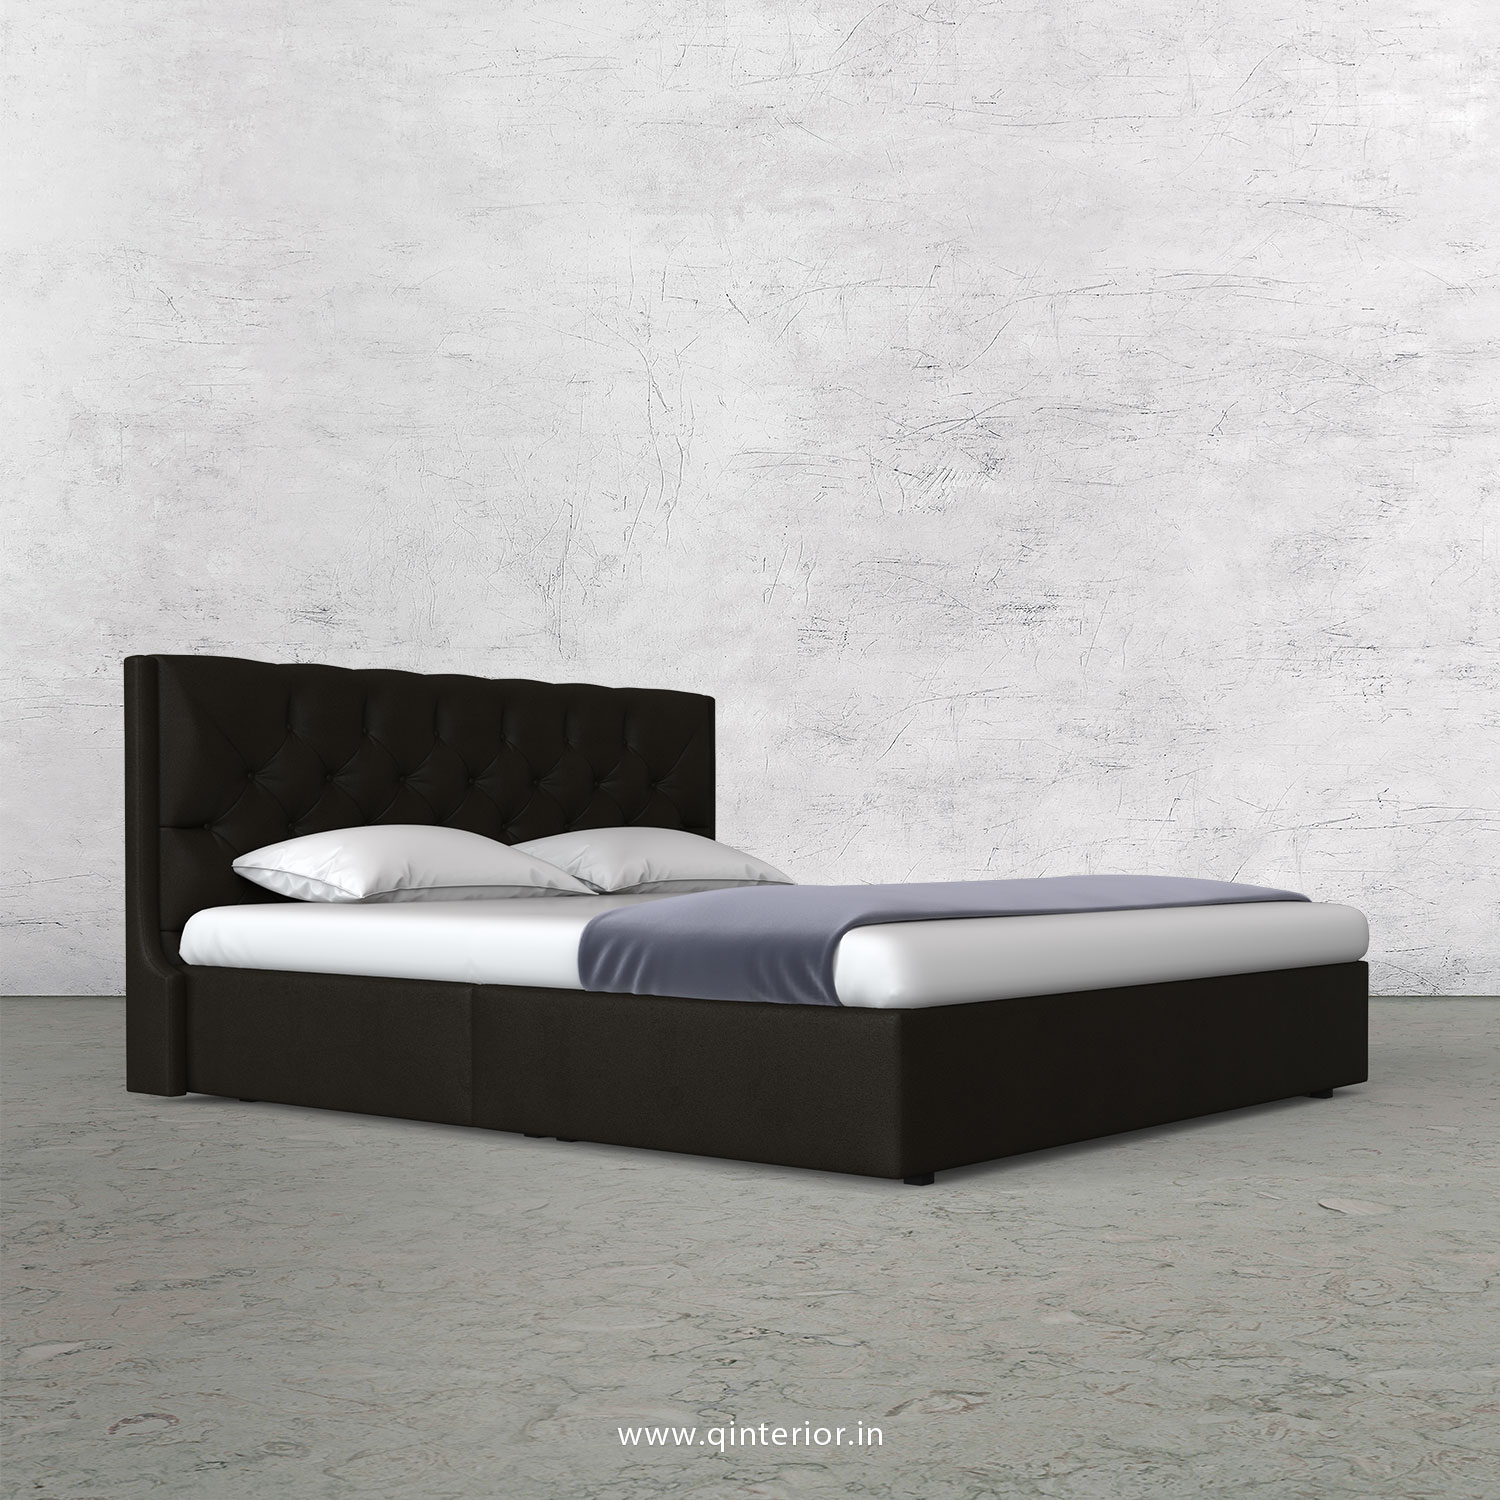 Scorpius King Size Bed in Fab Leather Fabric - KBD009 FL11